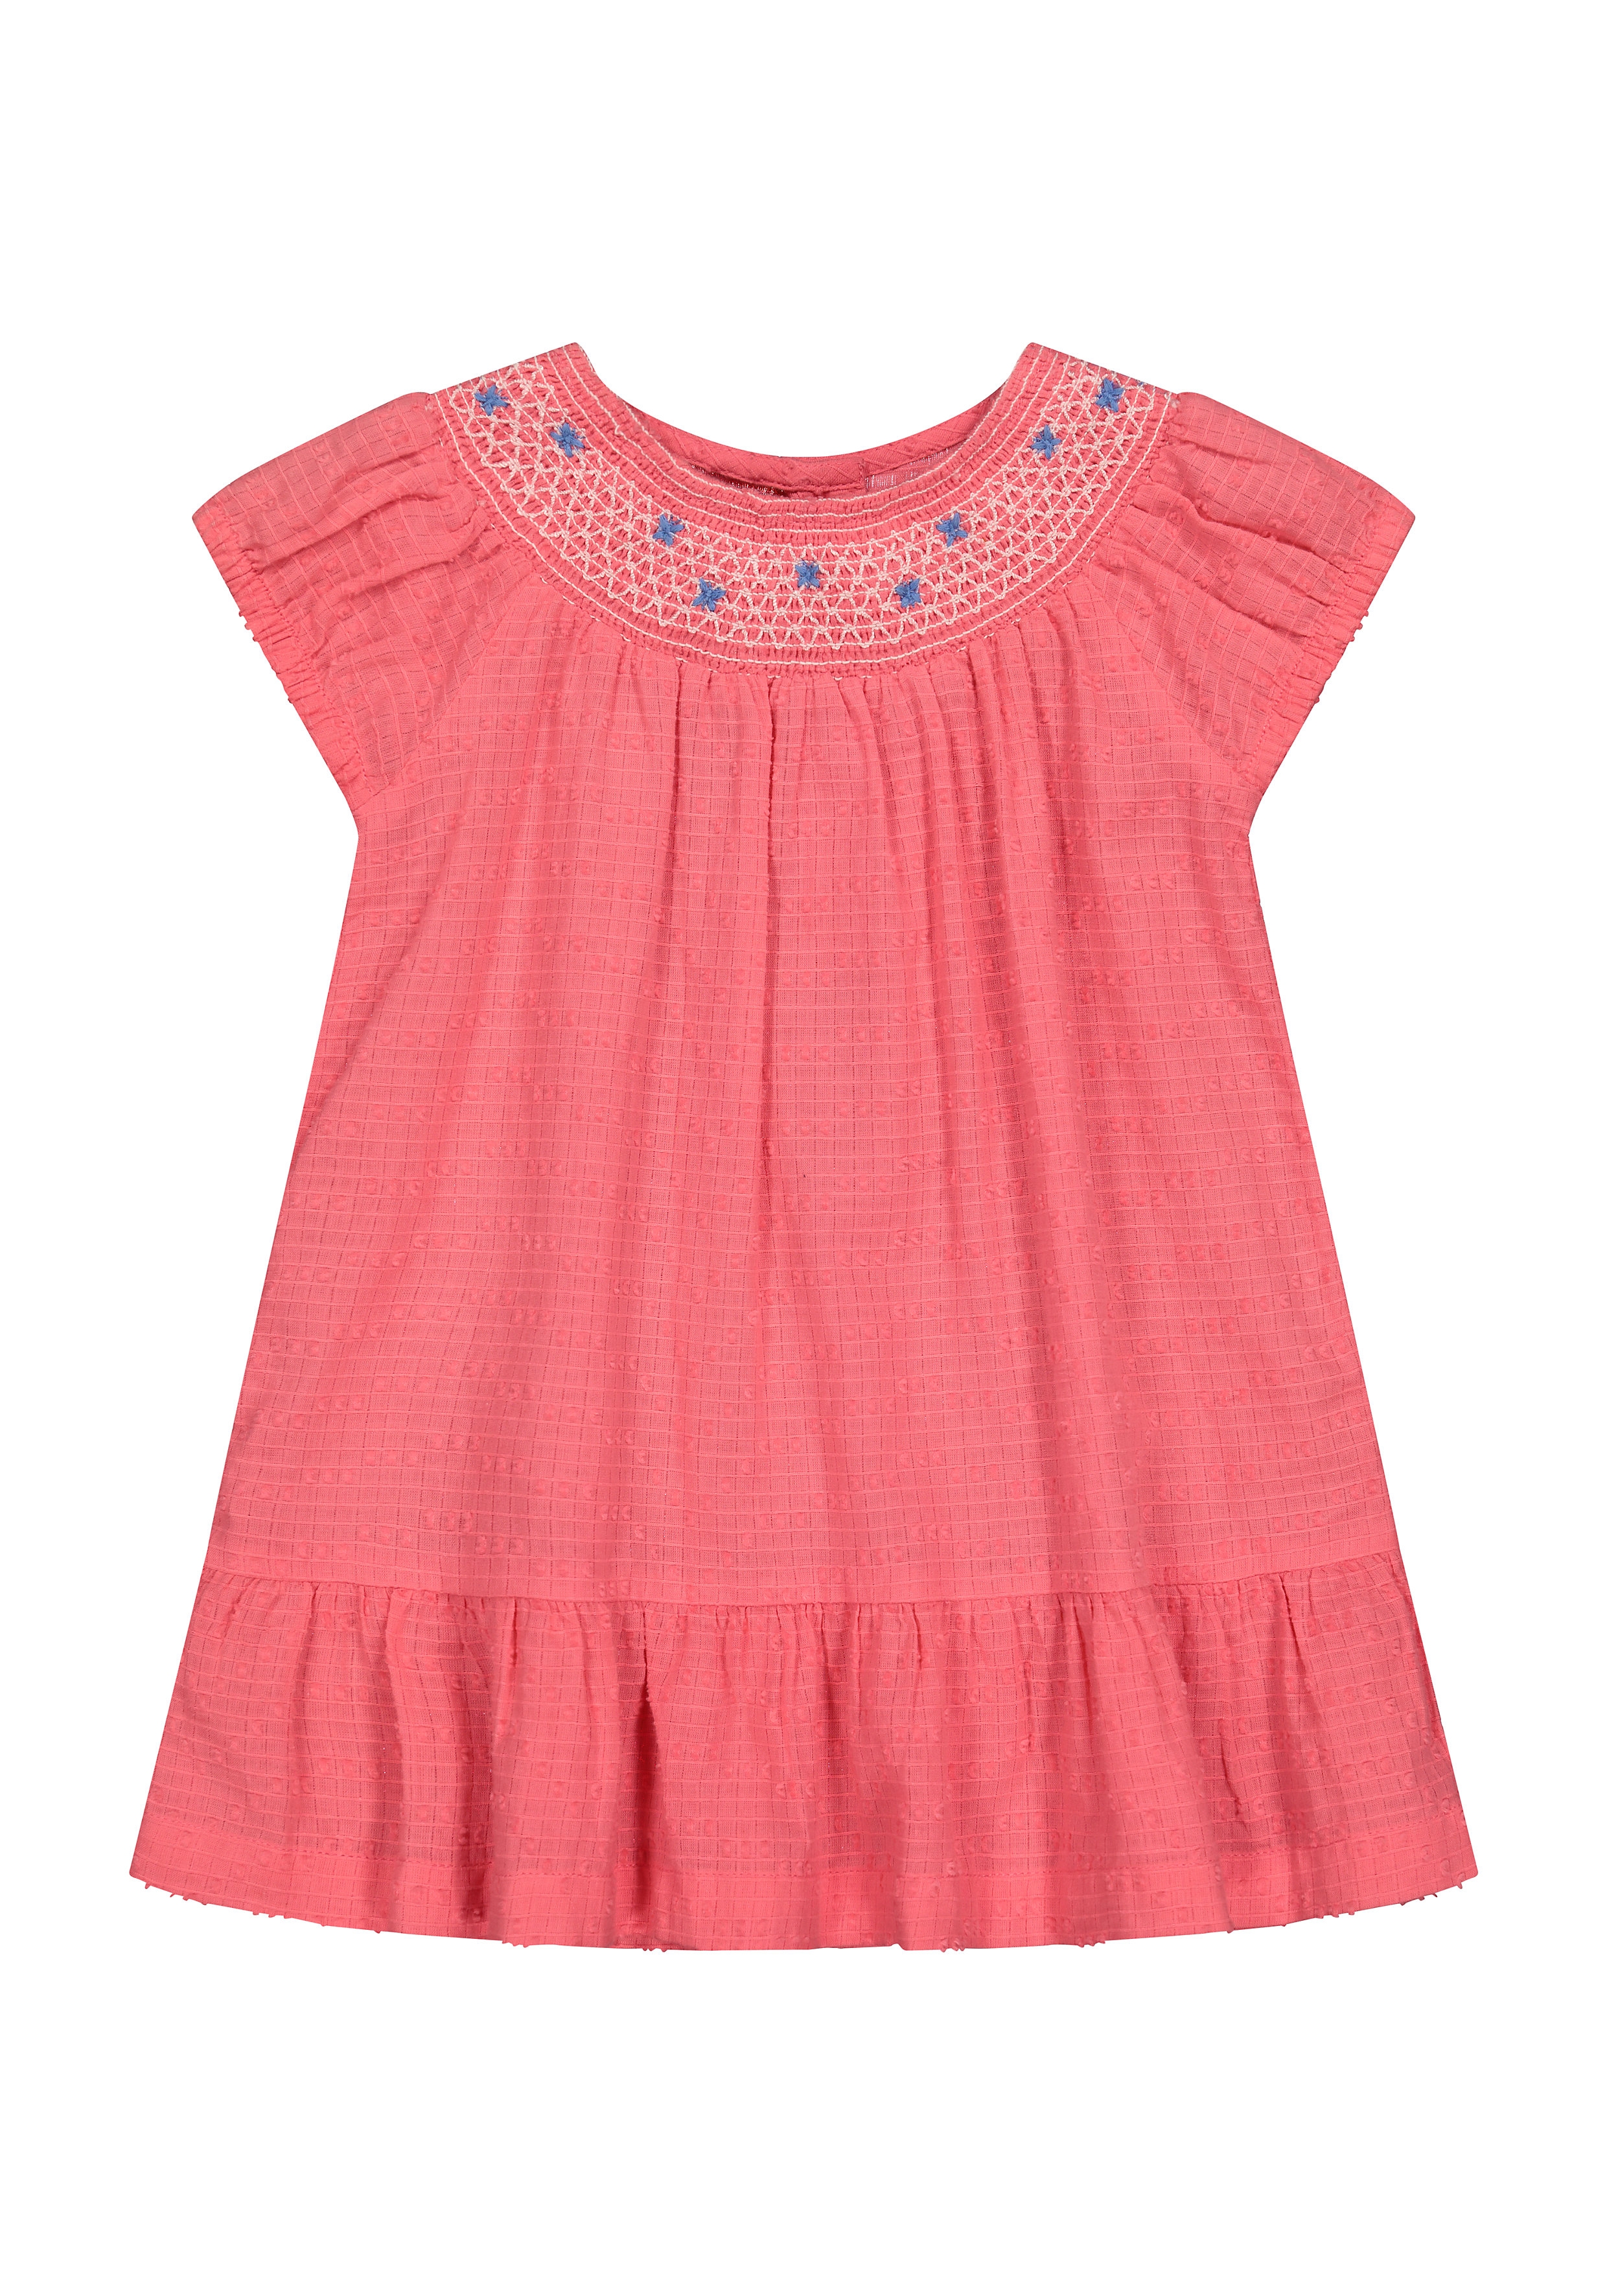 Mothercare | Girls Half Sleeves Embroidered Dress - Pink